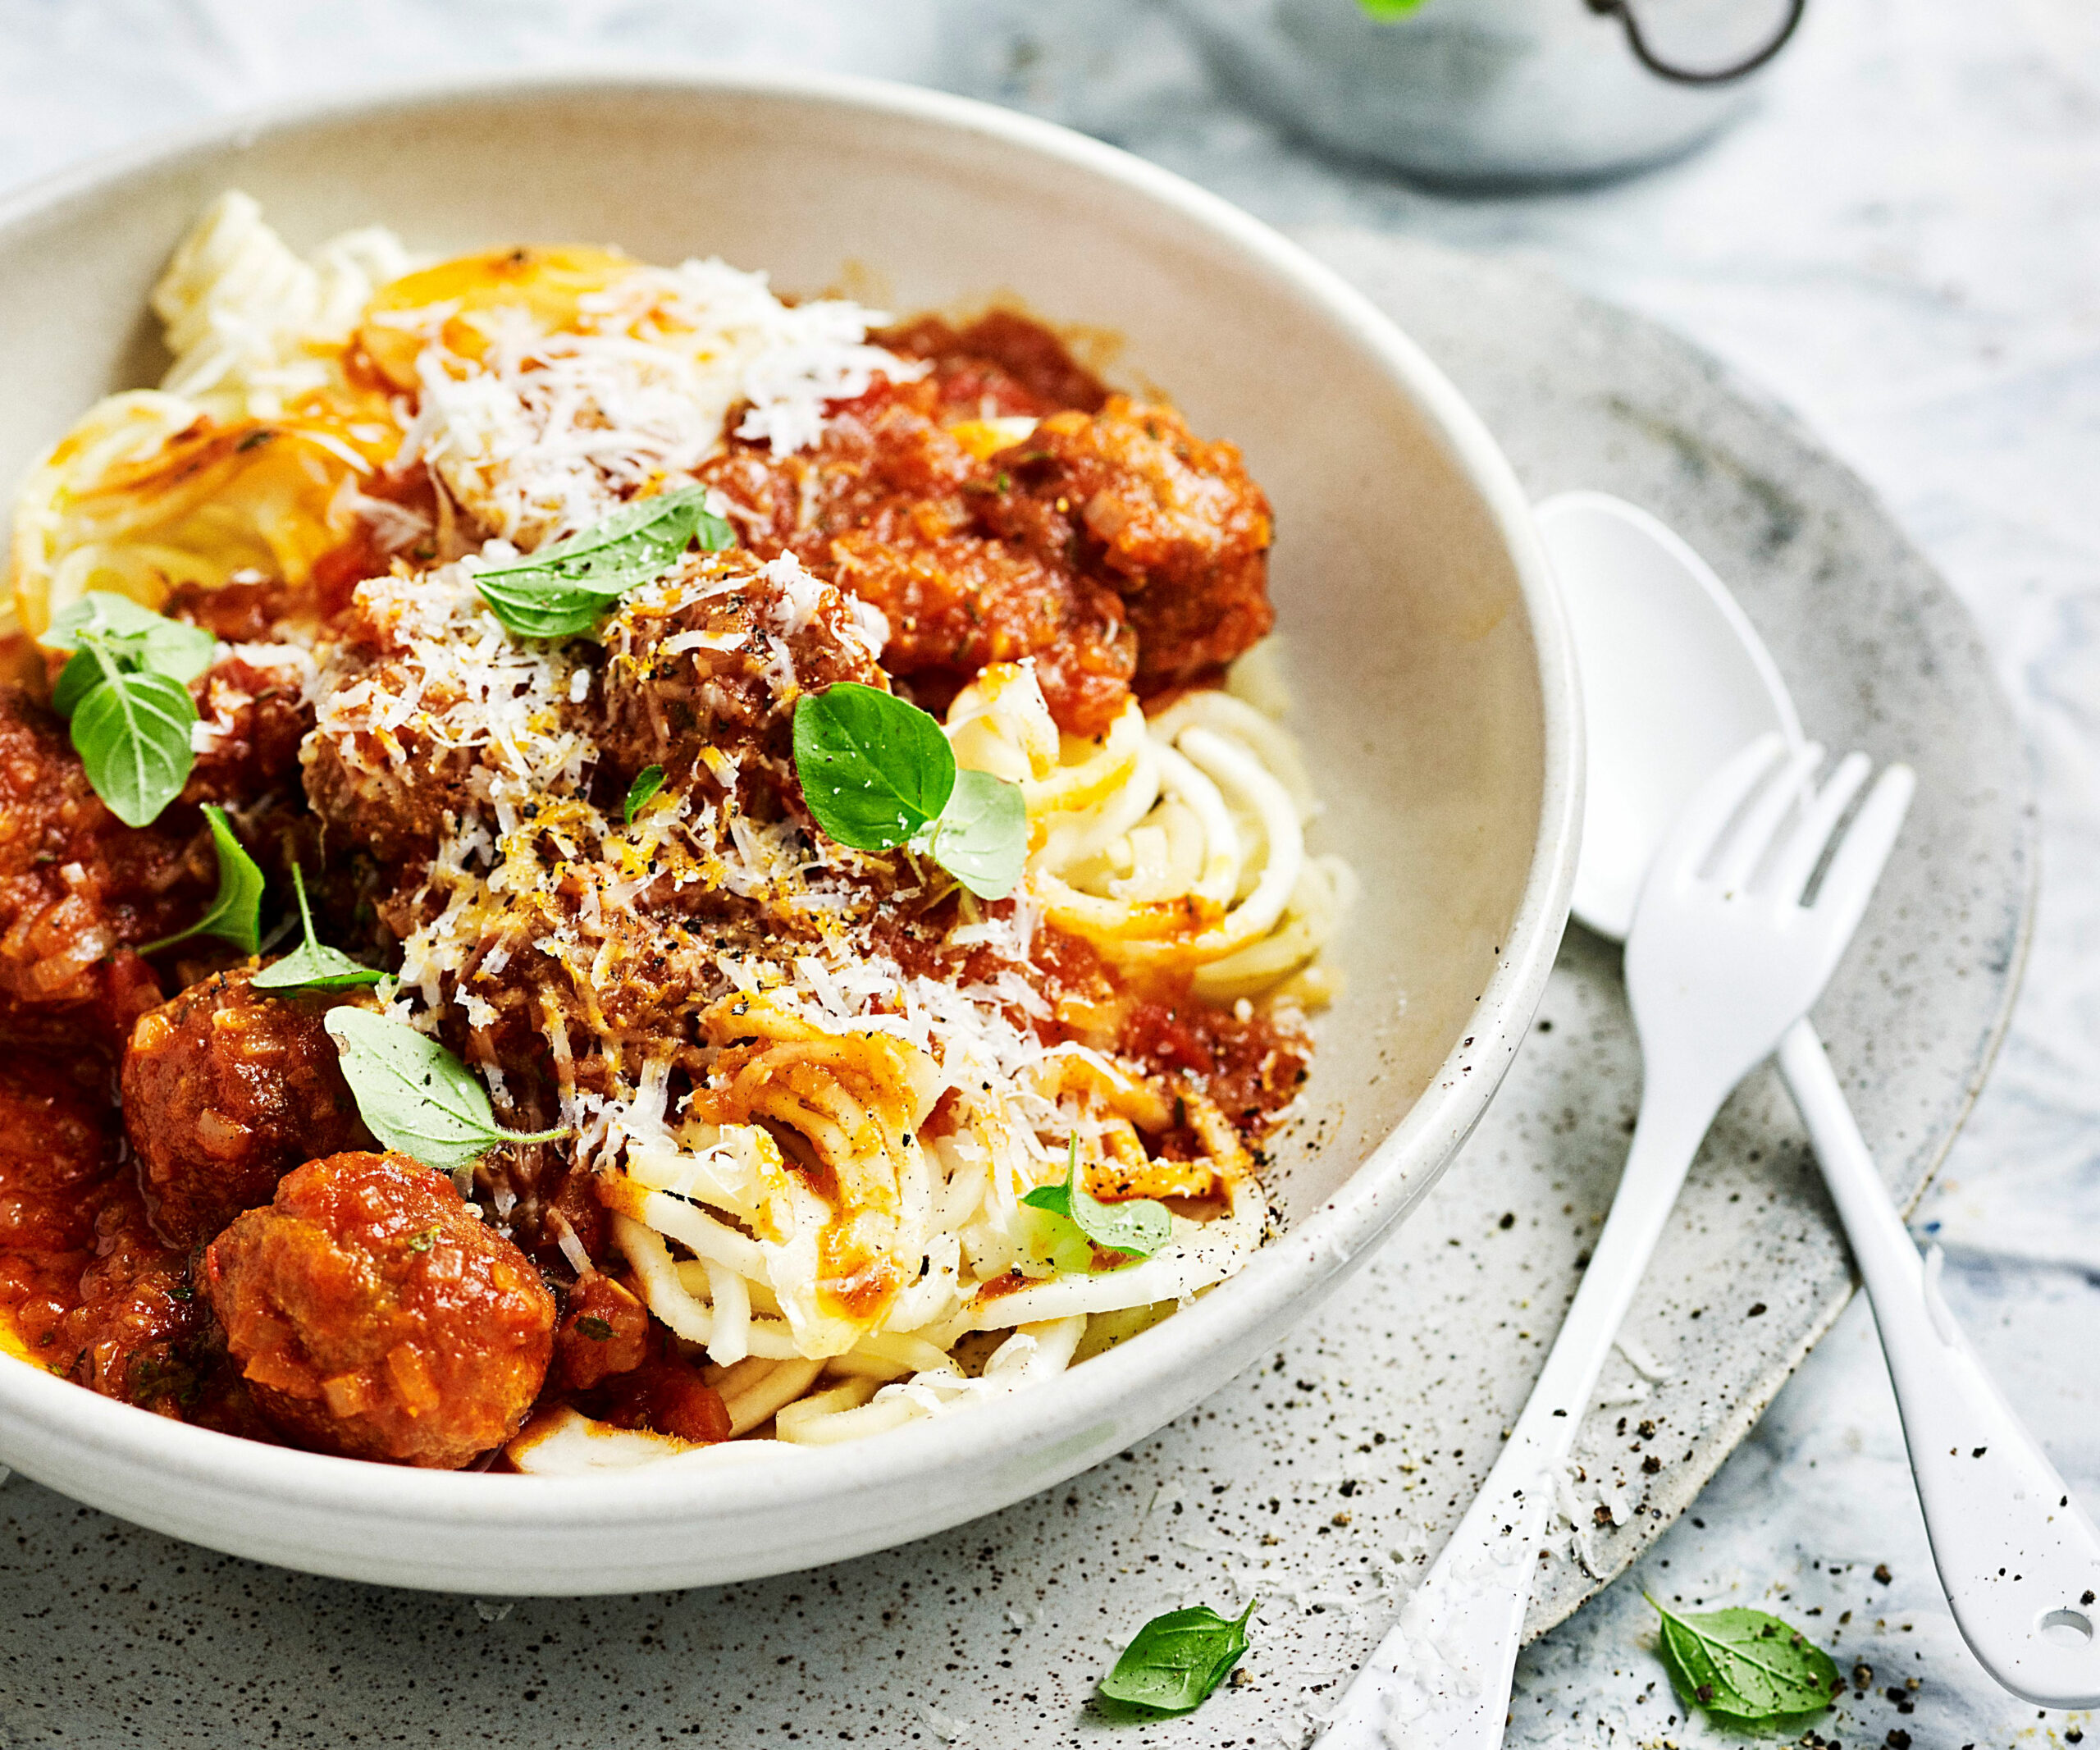 Parsnip noodles with spicy lamb meatball ragu